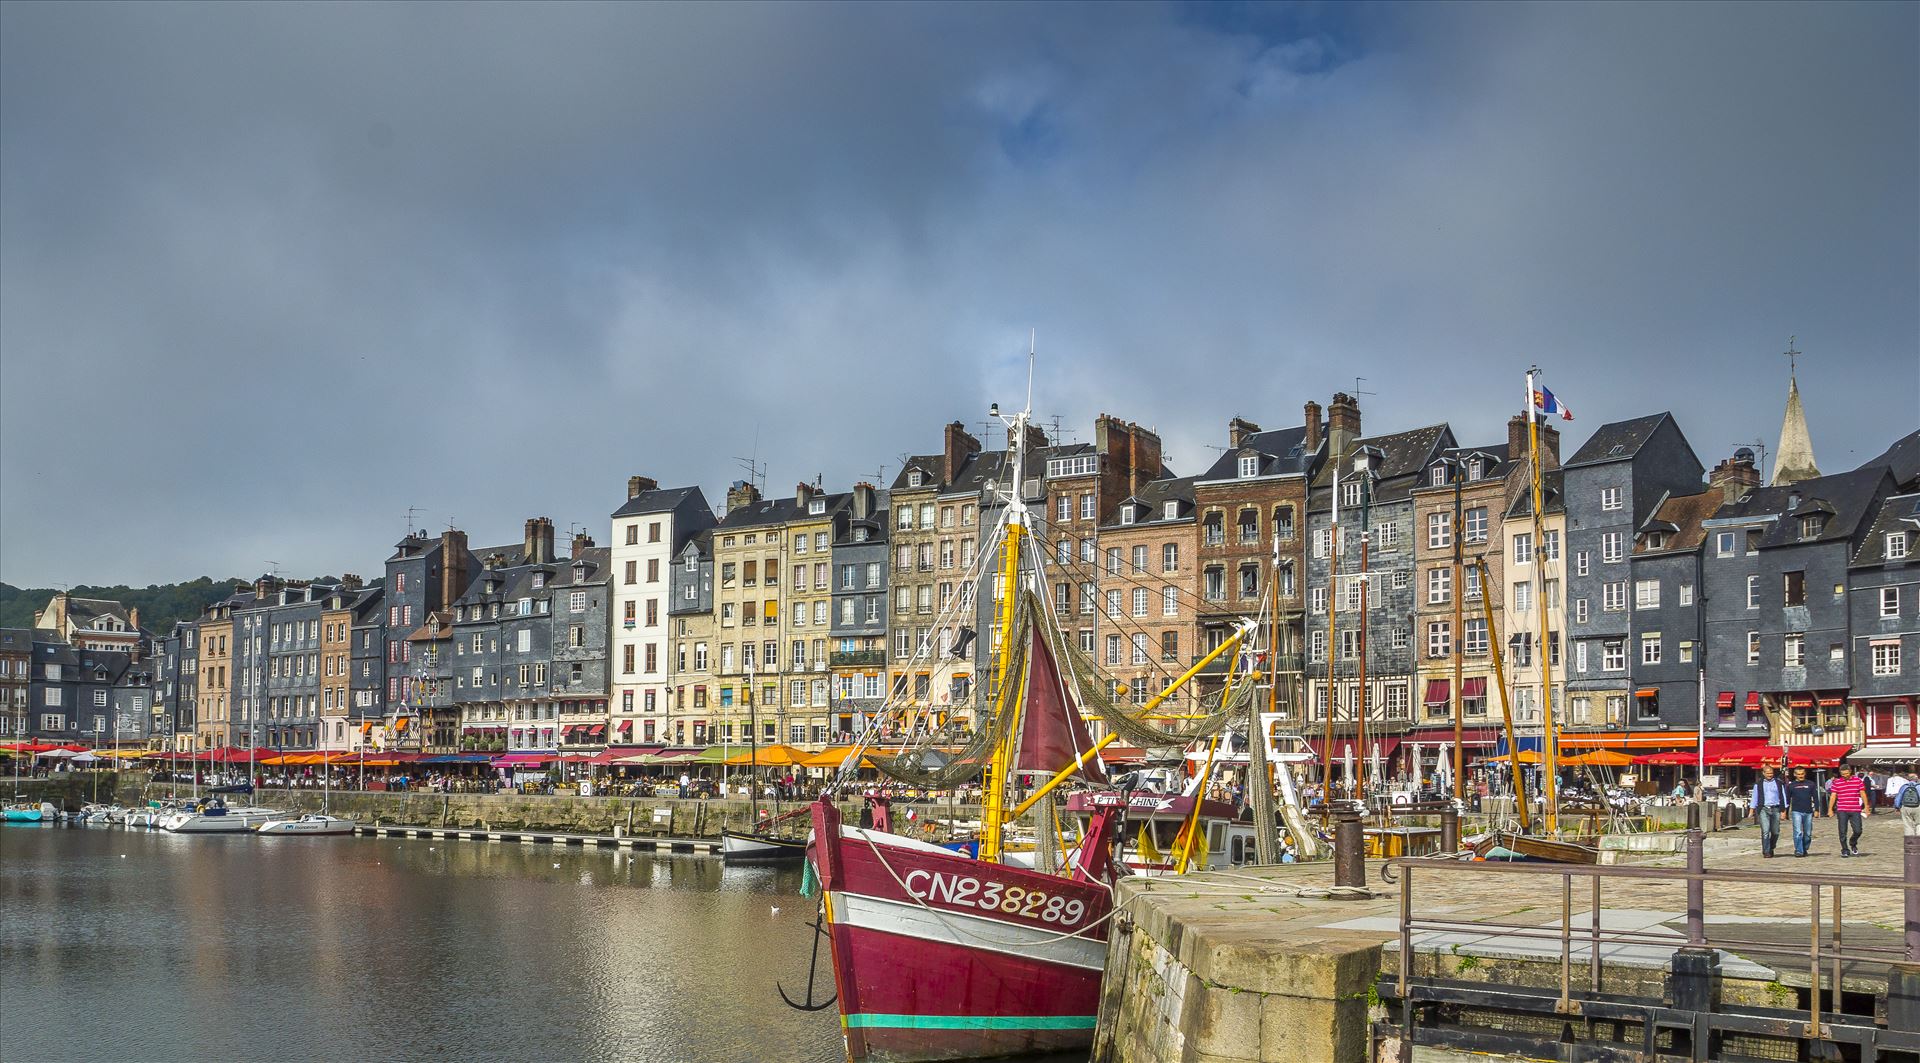 Honfleur, France - Ports don’t come any prettier than Honfleur on the Seine’s estuary by Buckmaster